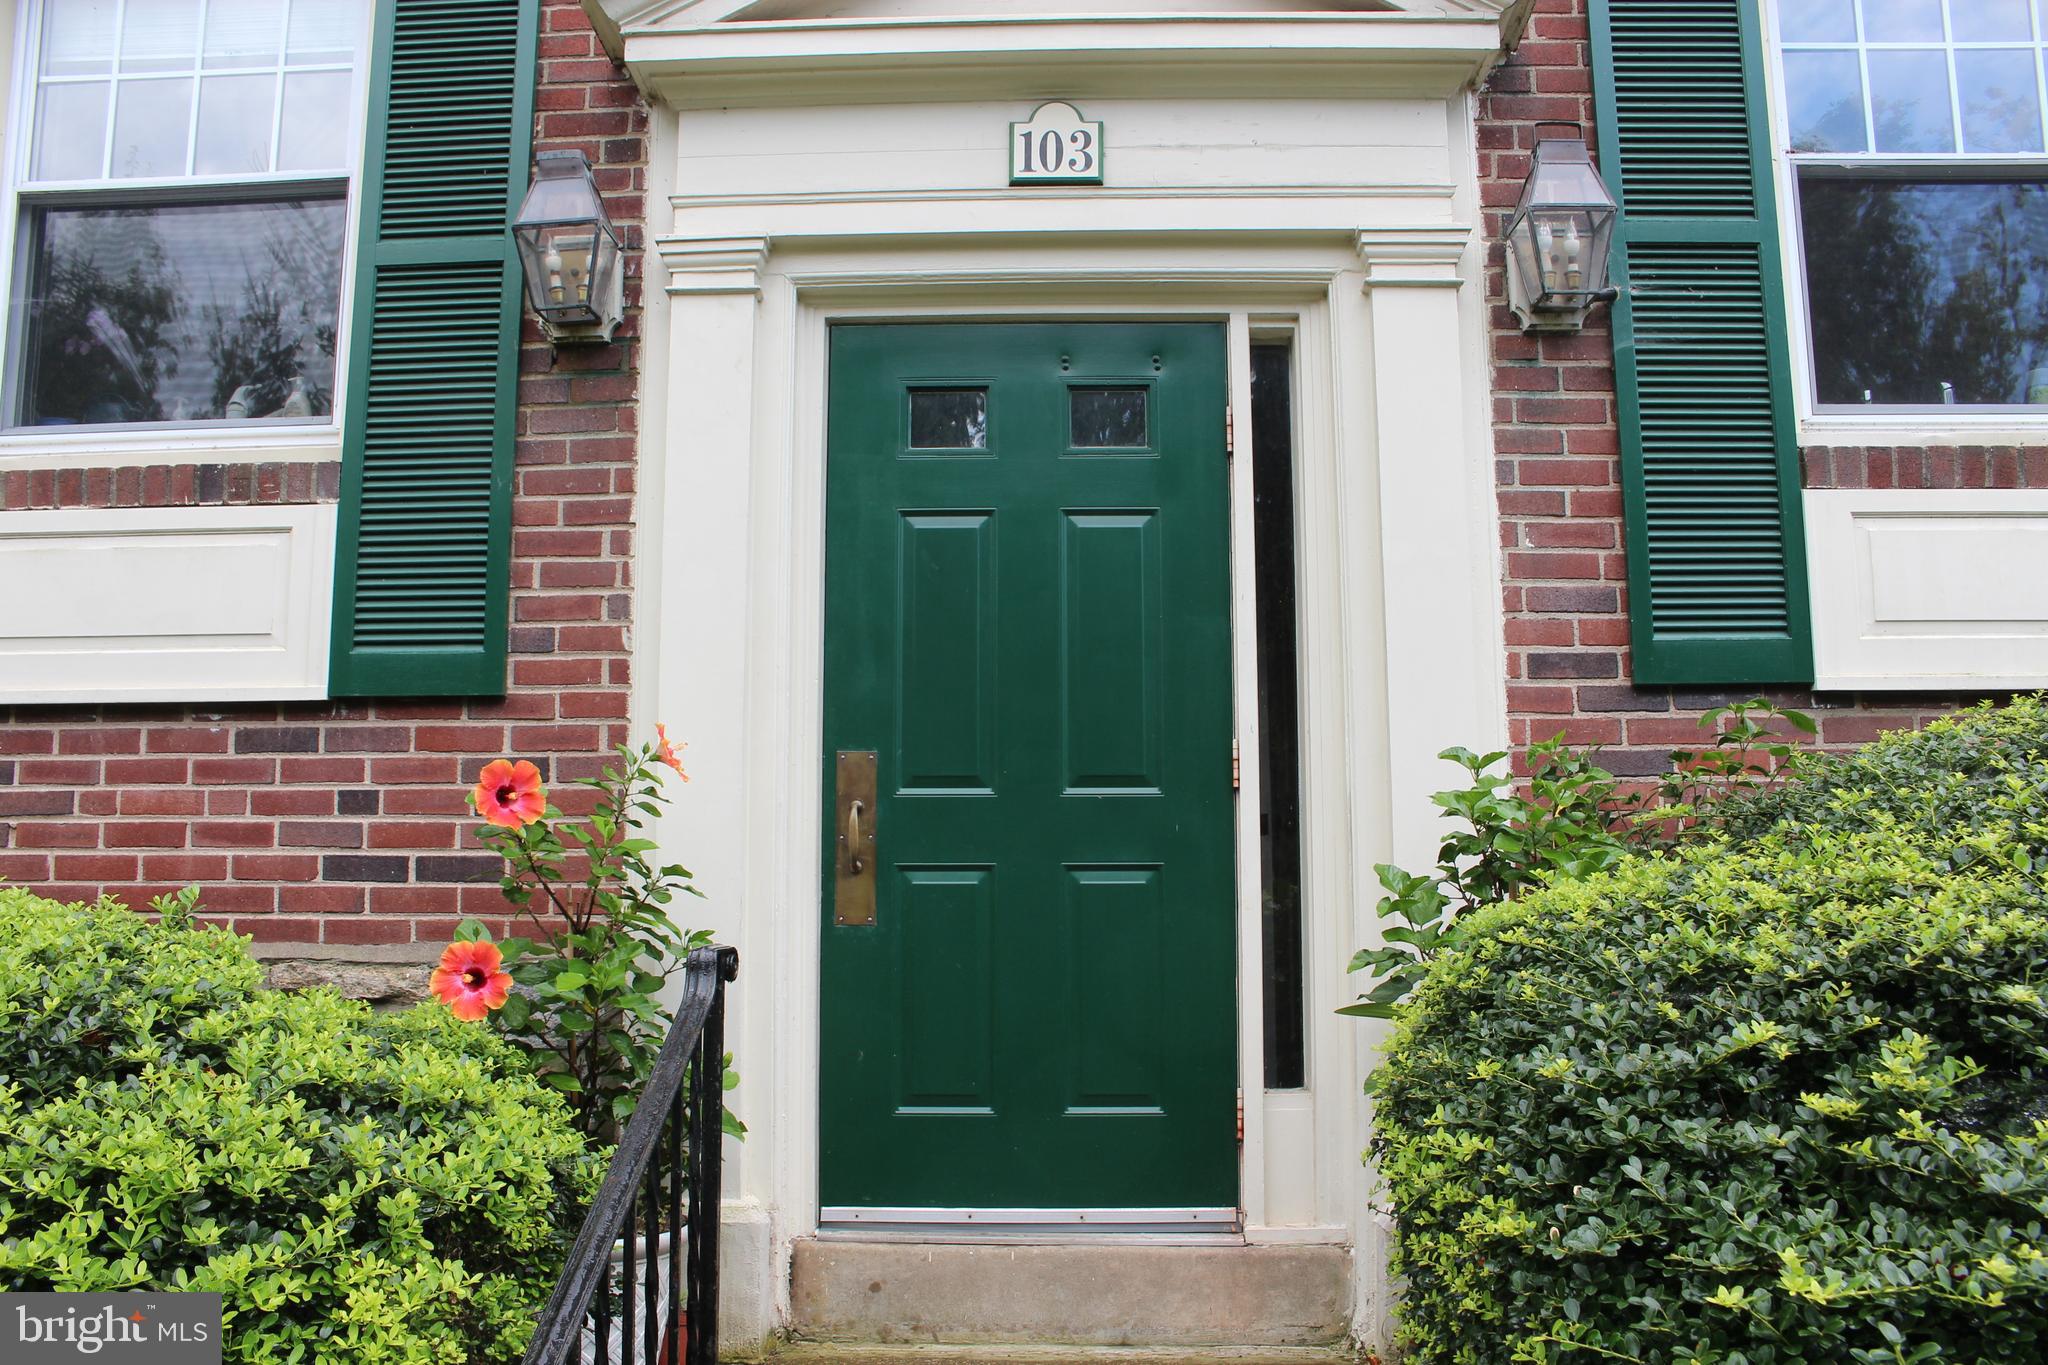 a view of a entryway door of the house